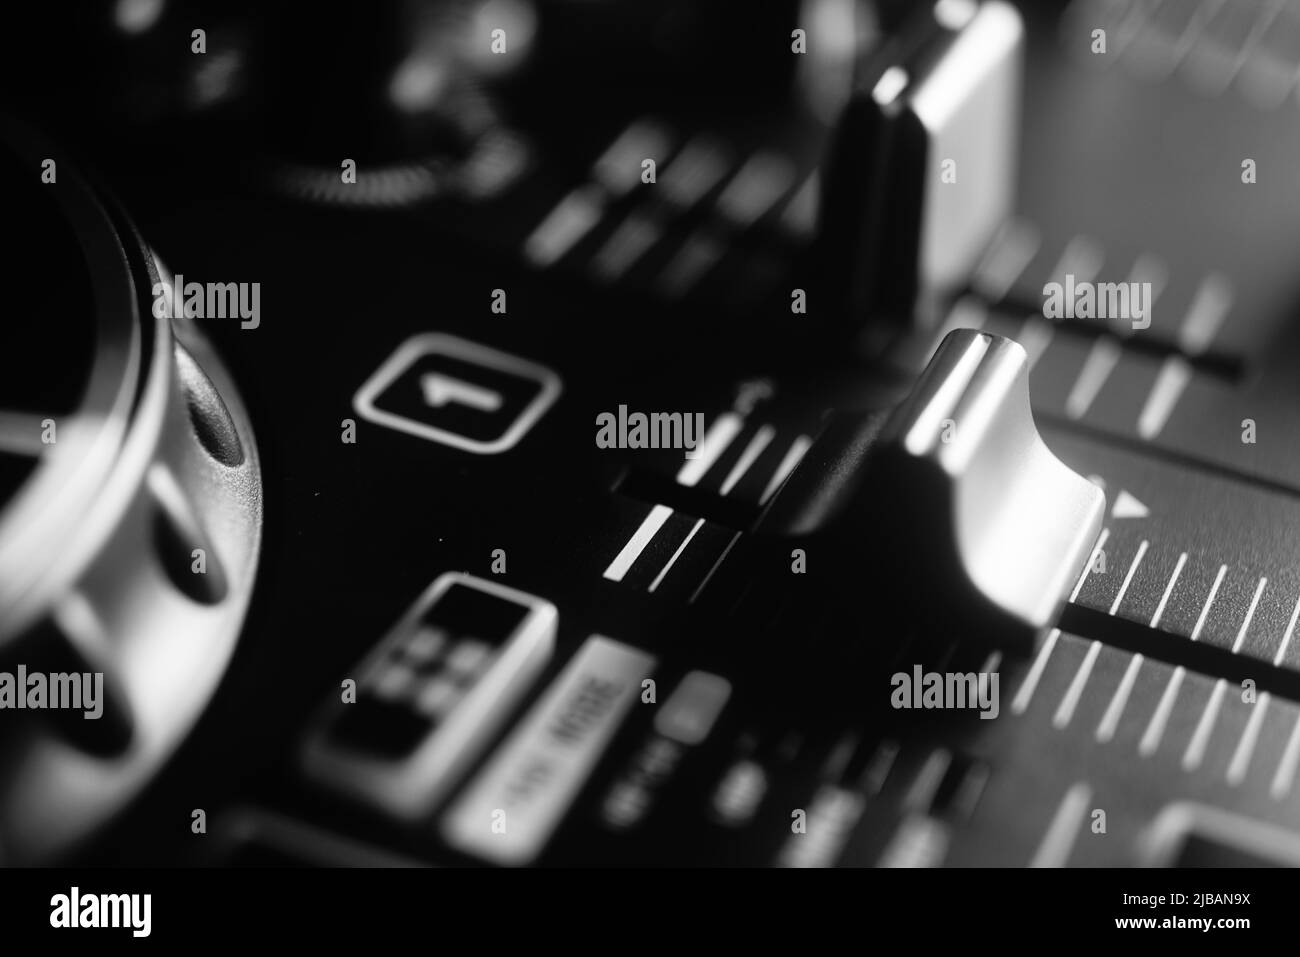 Deejay mixing desk black and white photo in Ibiza nightclub house music party. Stock Photo